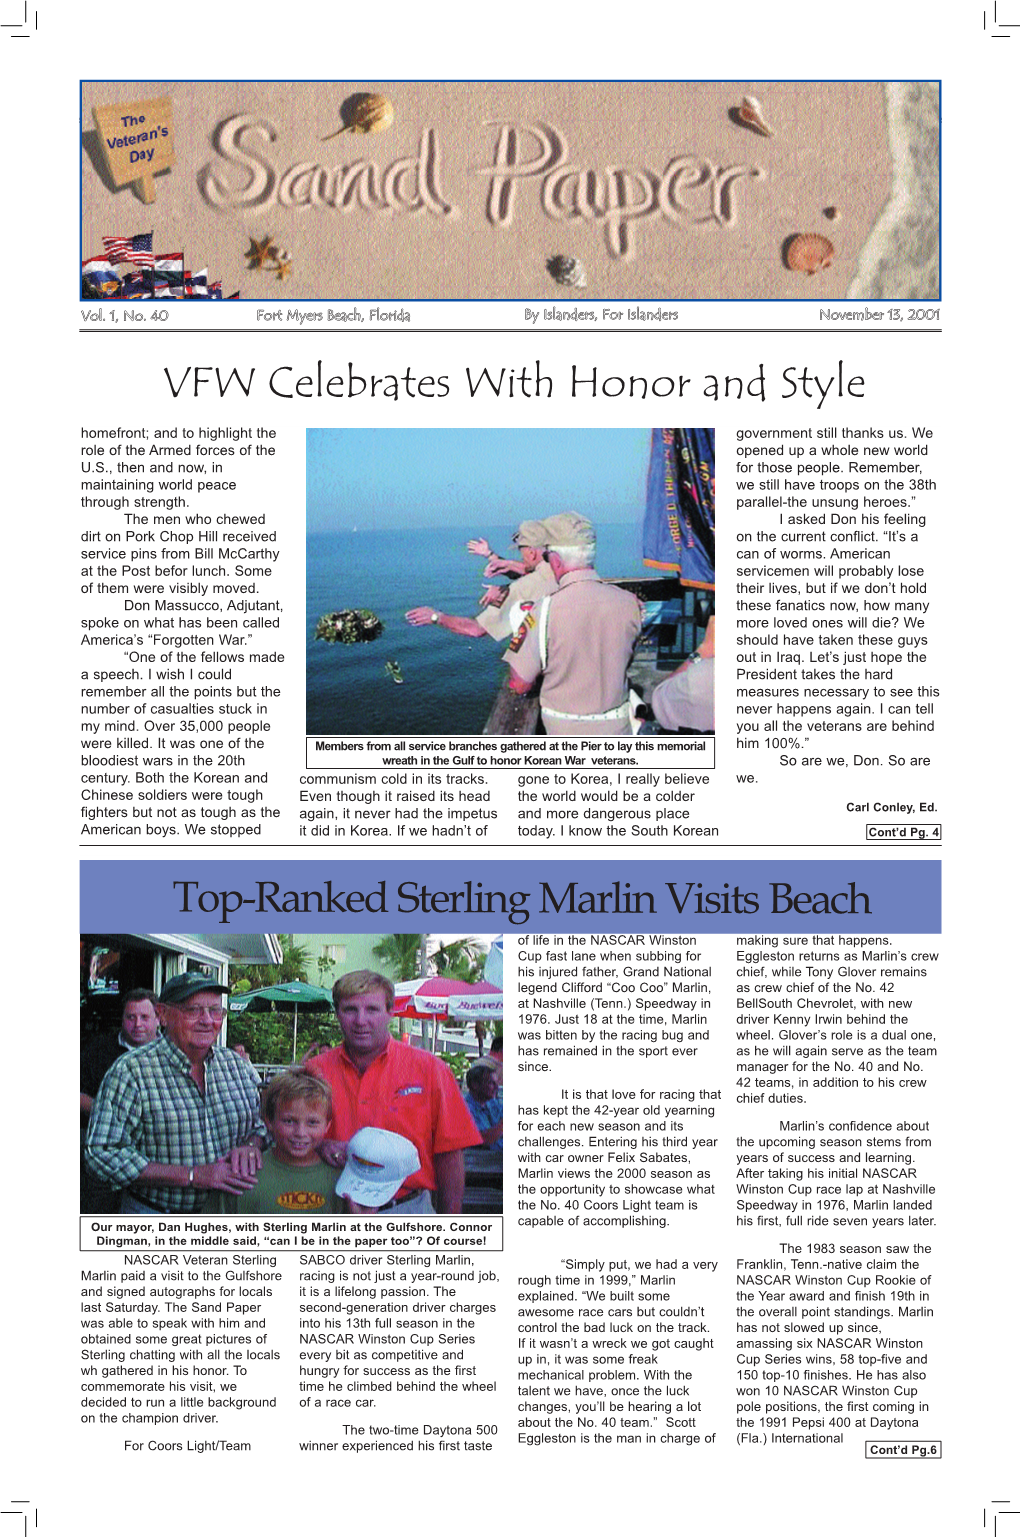 VFW Celebrates with Honor and Style Top-Ranked Sterling Marlin Visits